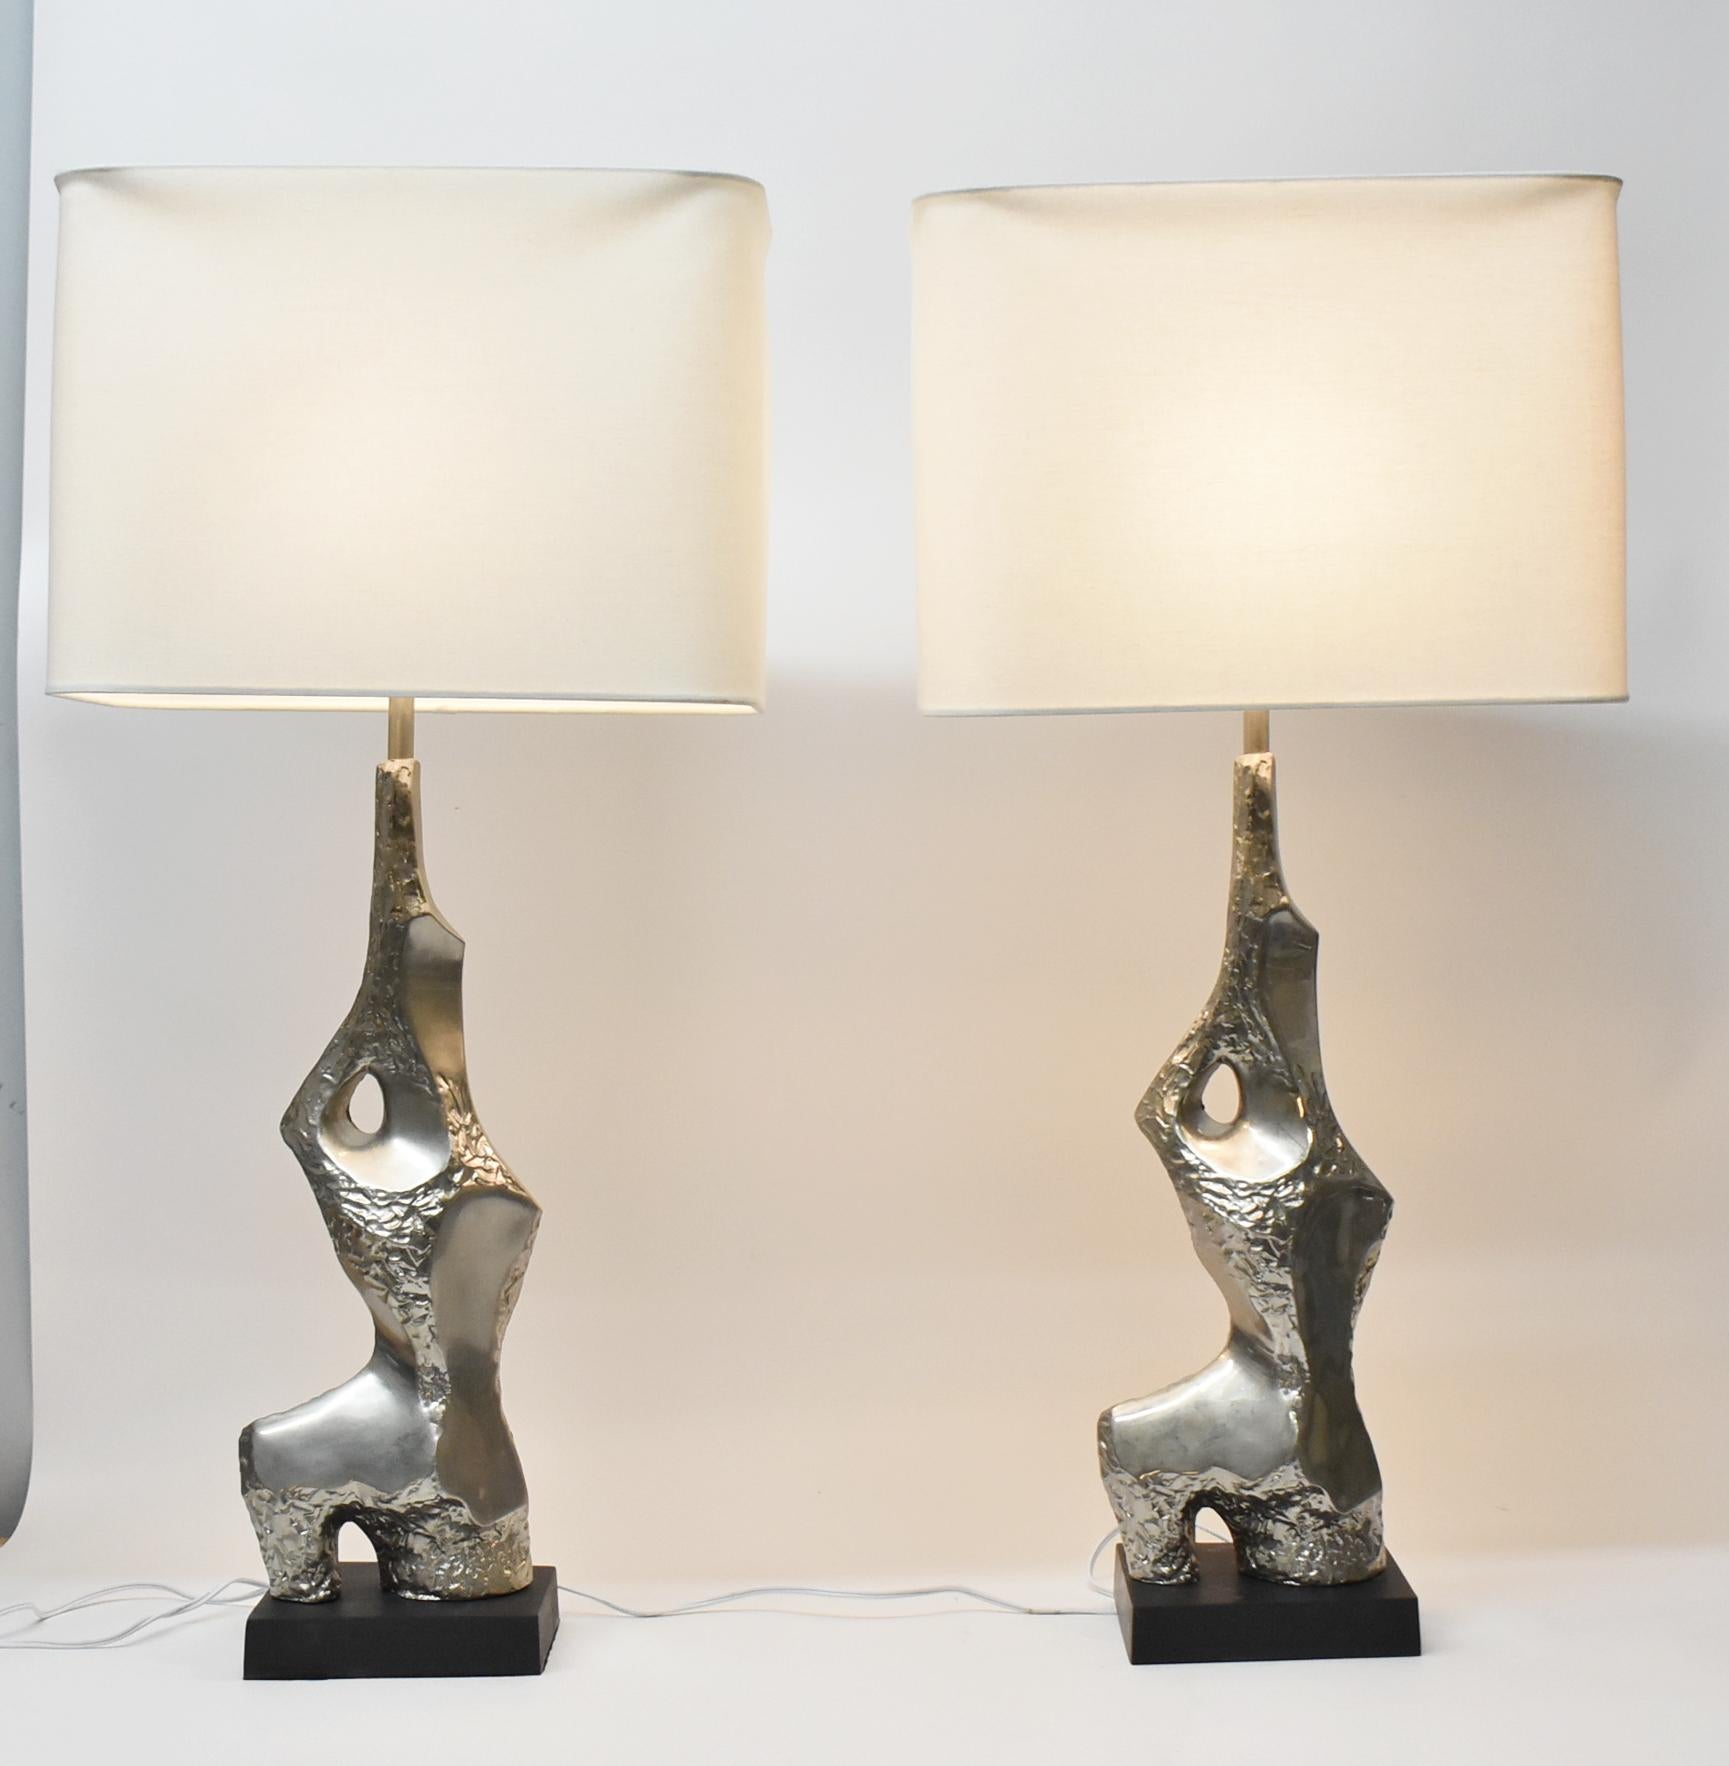 American Pair of Laurel Chrome Vintage Table Lamps Brutalist Abstract by Richard Barr